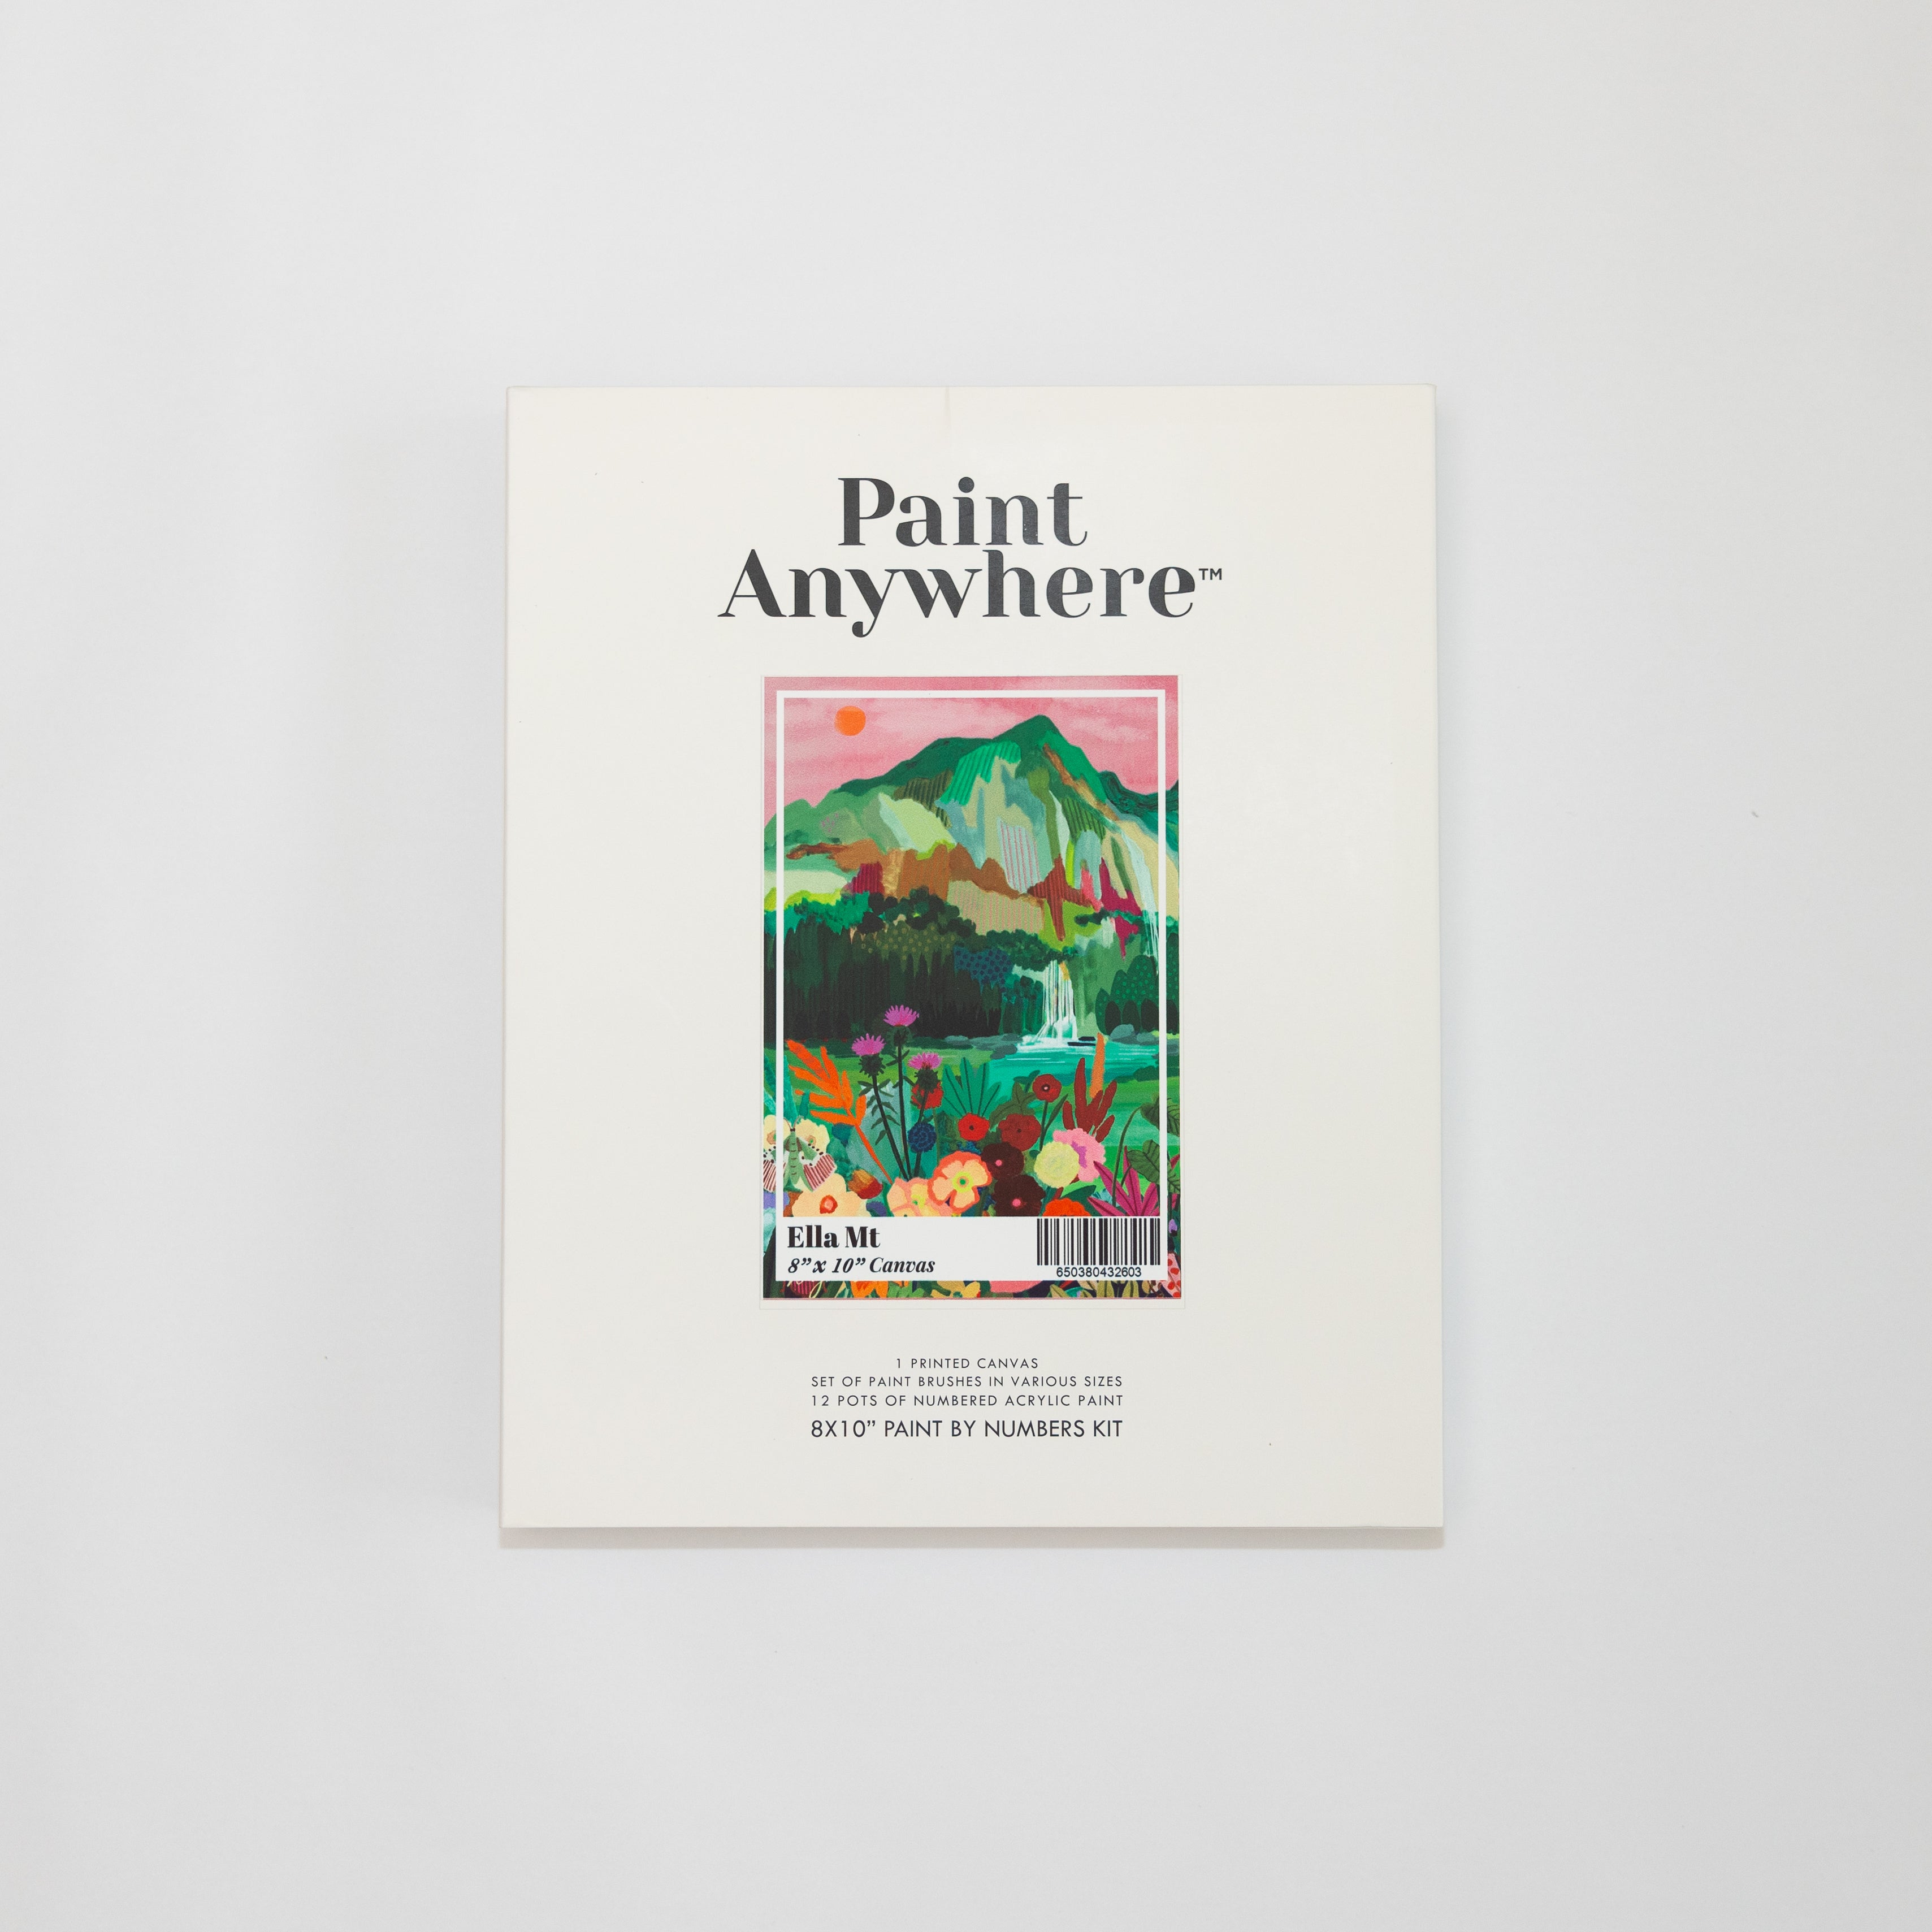 Visual Seaside Art - NEW Paint By Number - Paint by numbers for adult